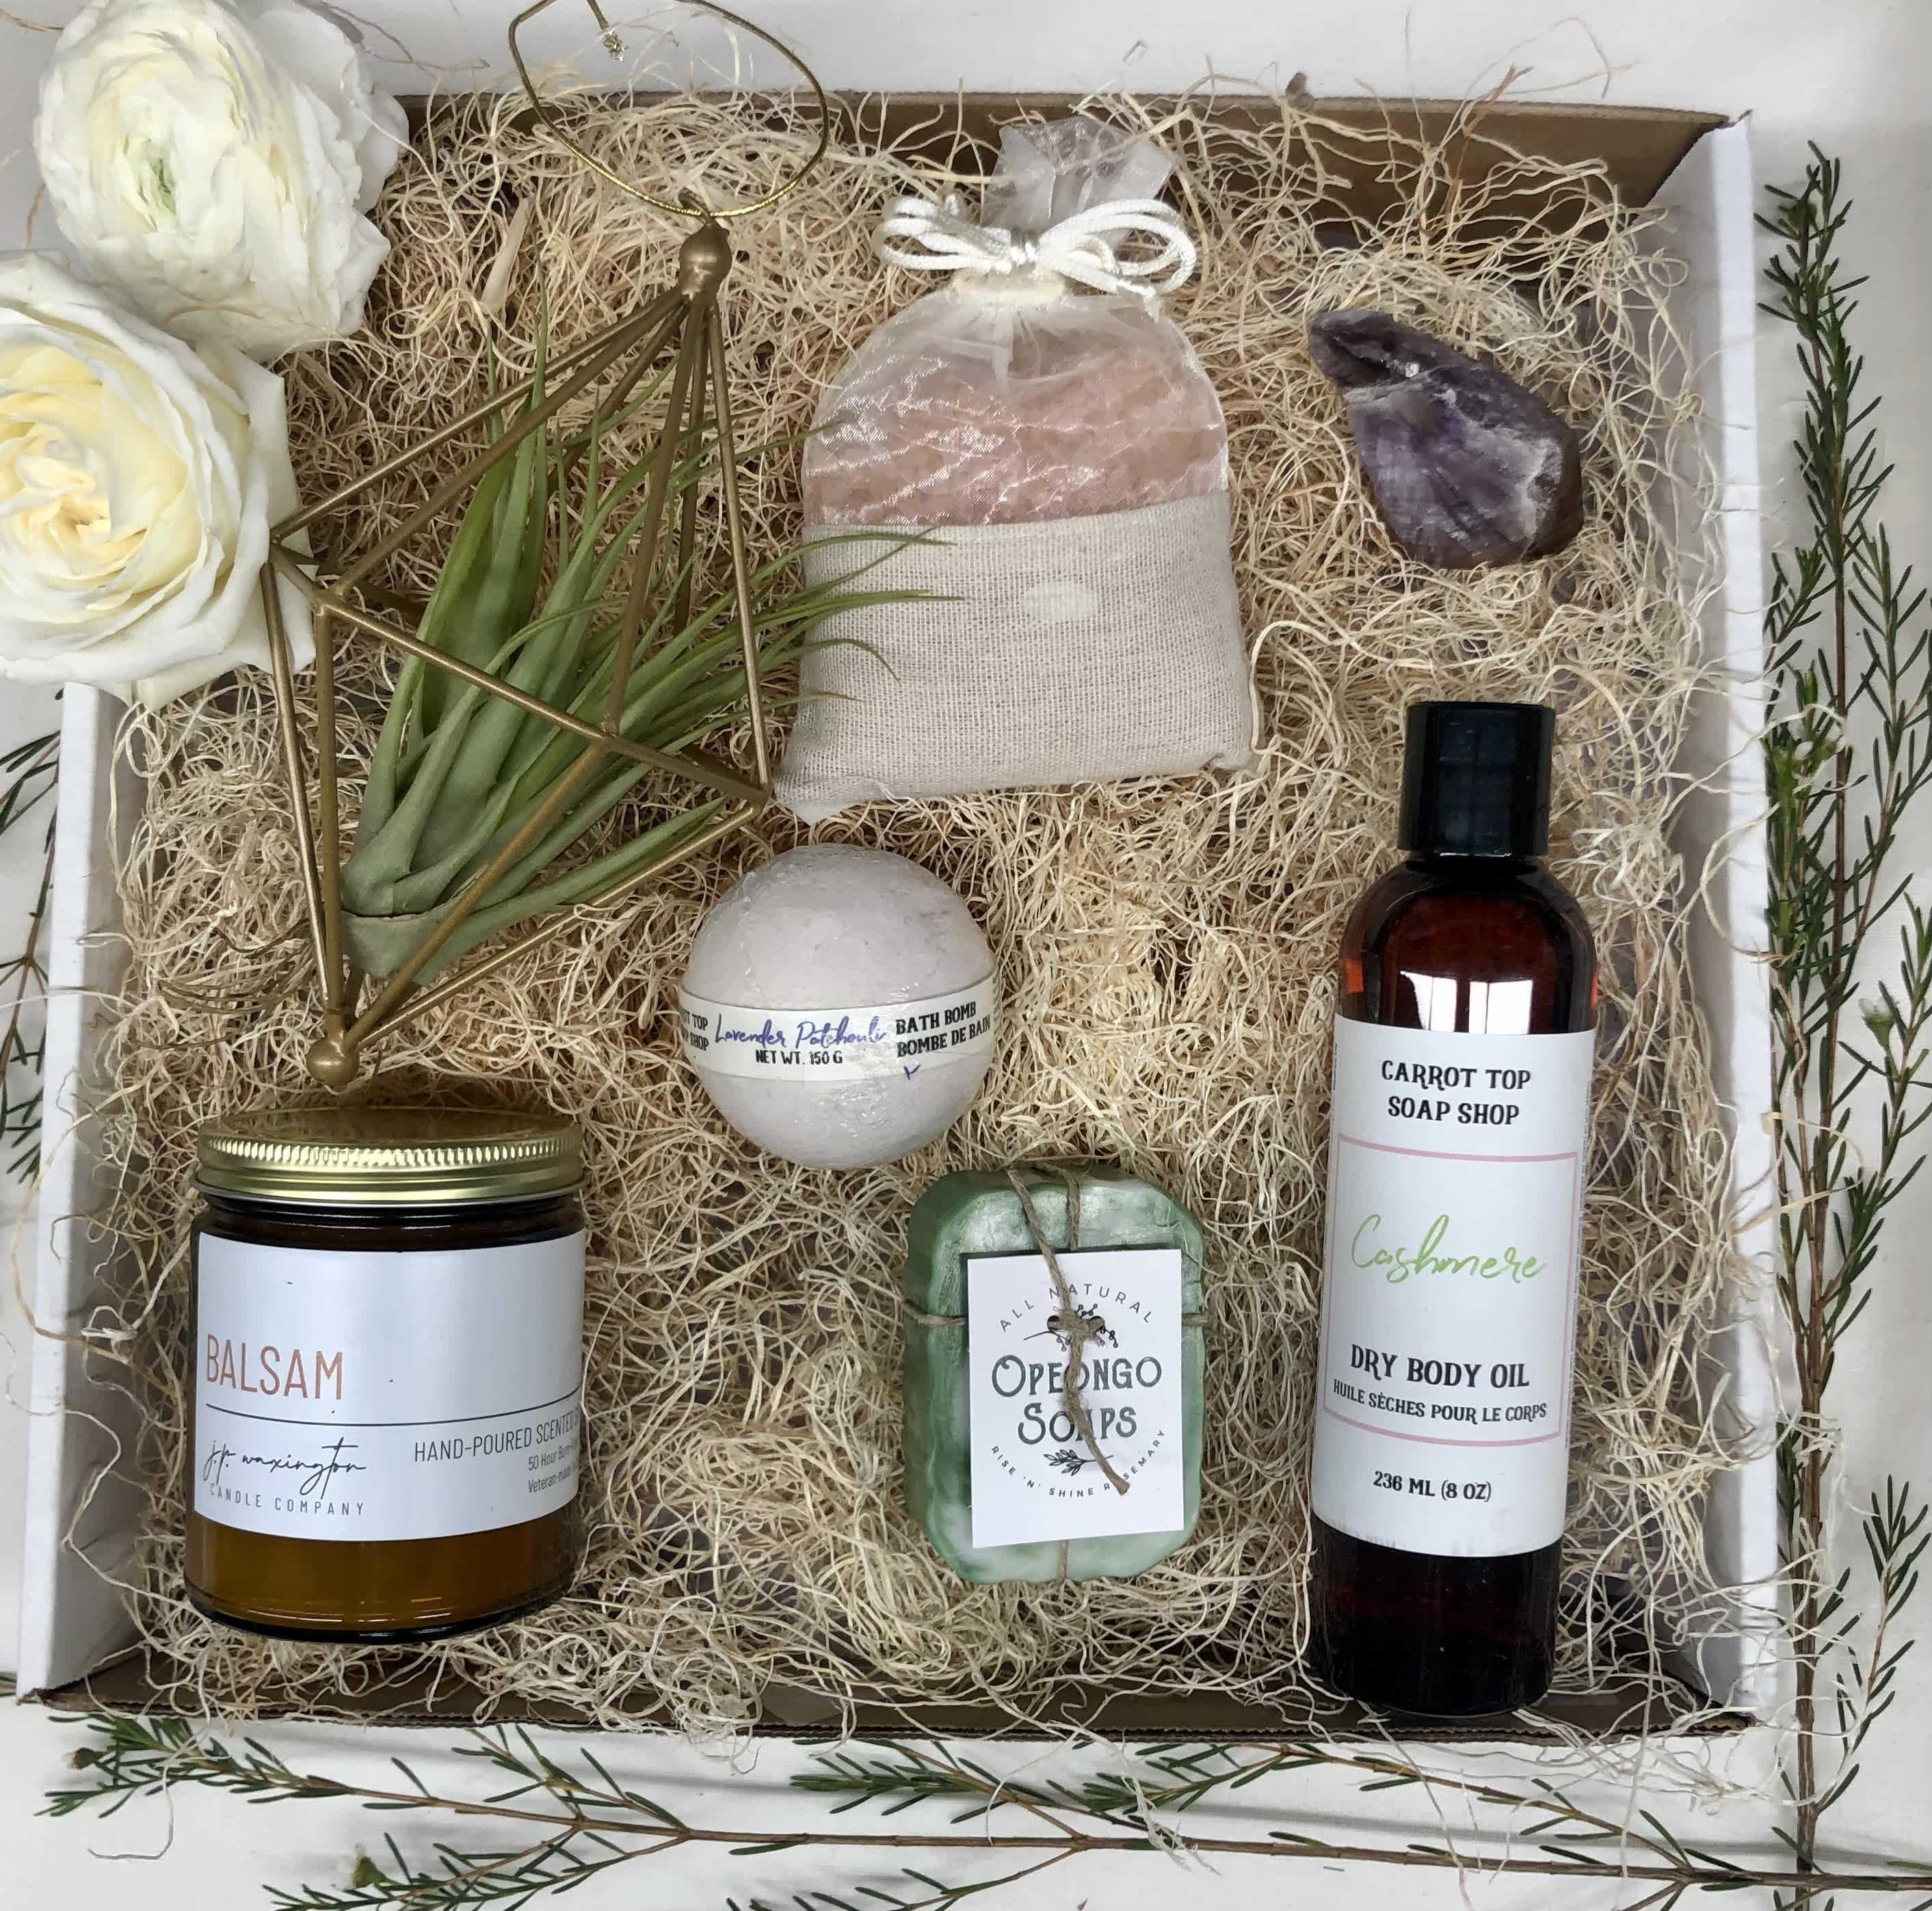 FRESH AND CLEAN BATH GIFT BASKET - A luxurious bath gift basket to pamper the one you love. Featuring a locally made products such as a candle, bath bomb, soap, and body oil, and completed with bath salts, soap dish, a loofa and an air plant. Deluxe value pictured  